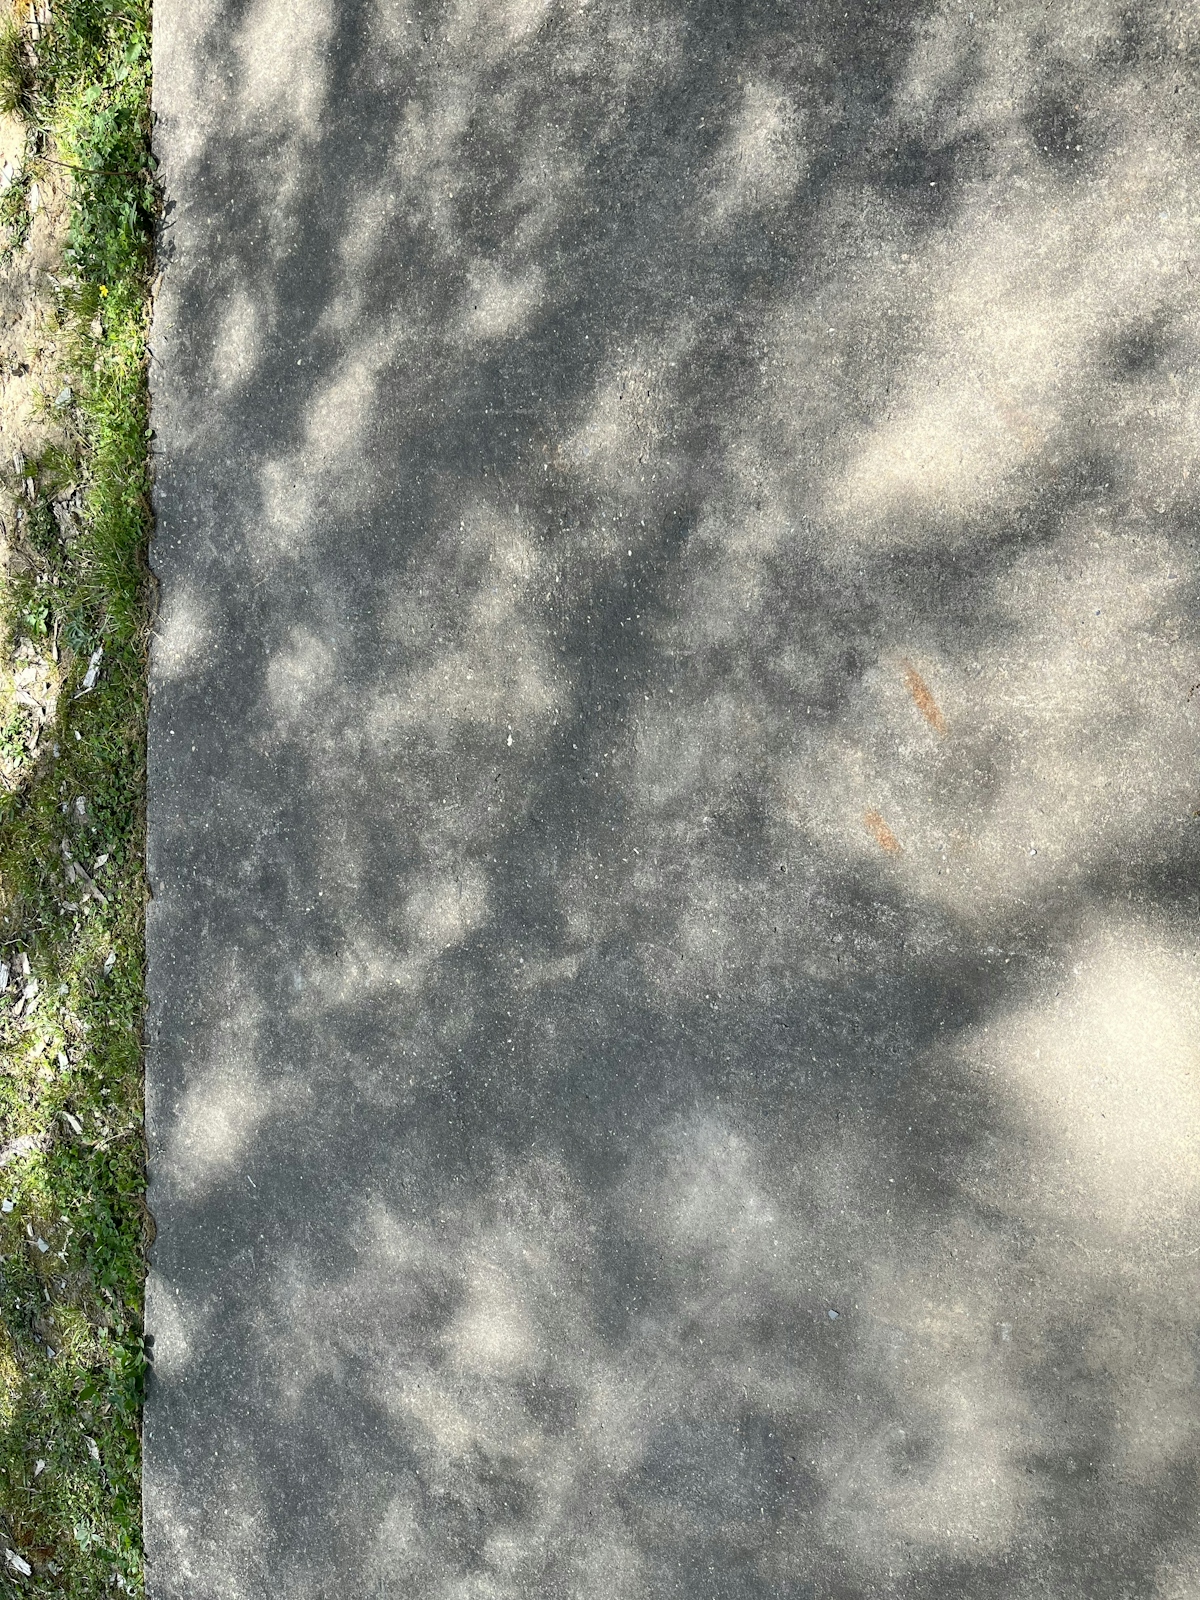 Same patio 5 minutes after total eclipse. Shadows are still intense but look more normal.